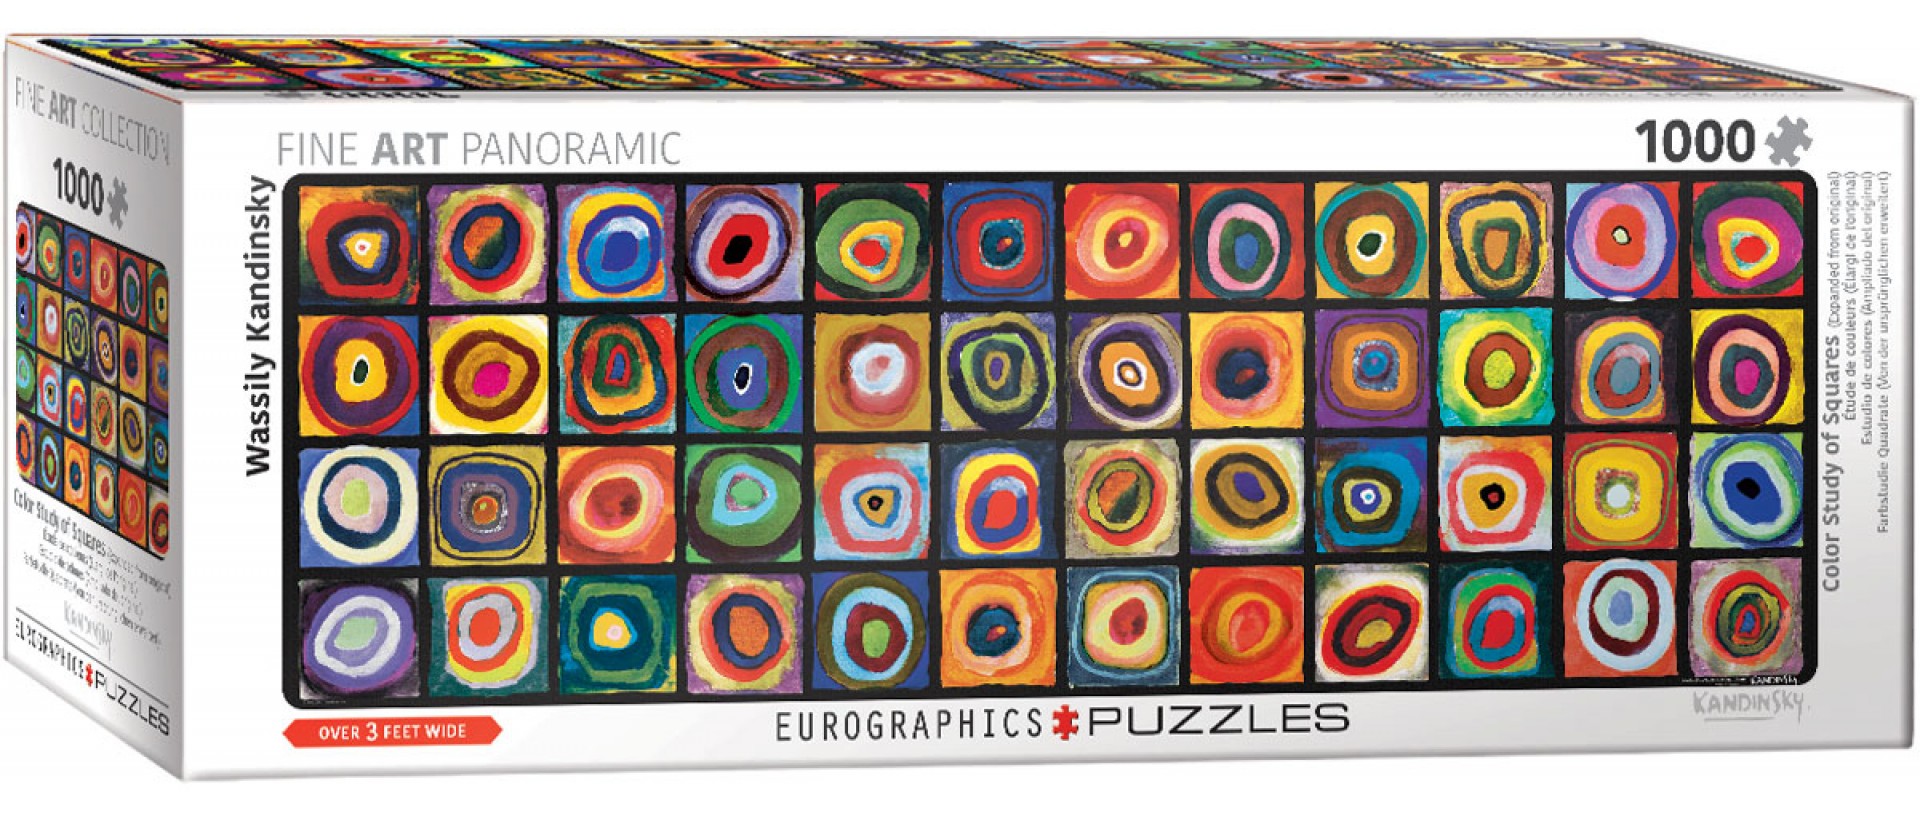 Color Study of Squares - Panoramic Puzzle Eurographics 6010-5443